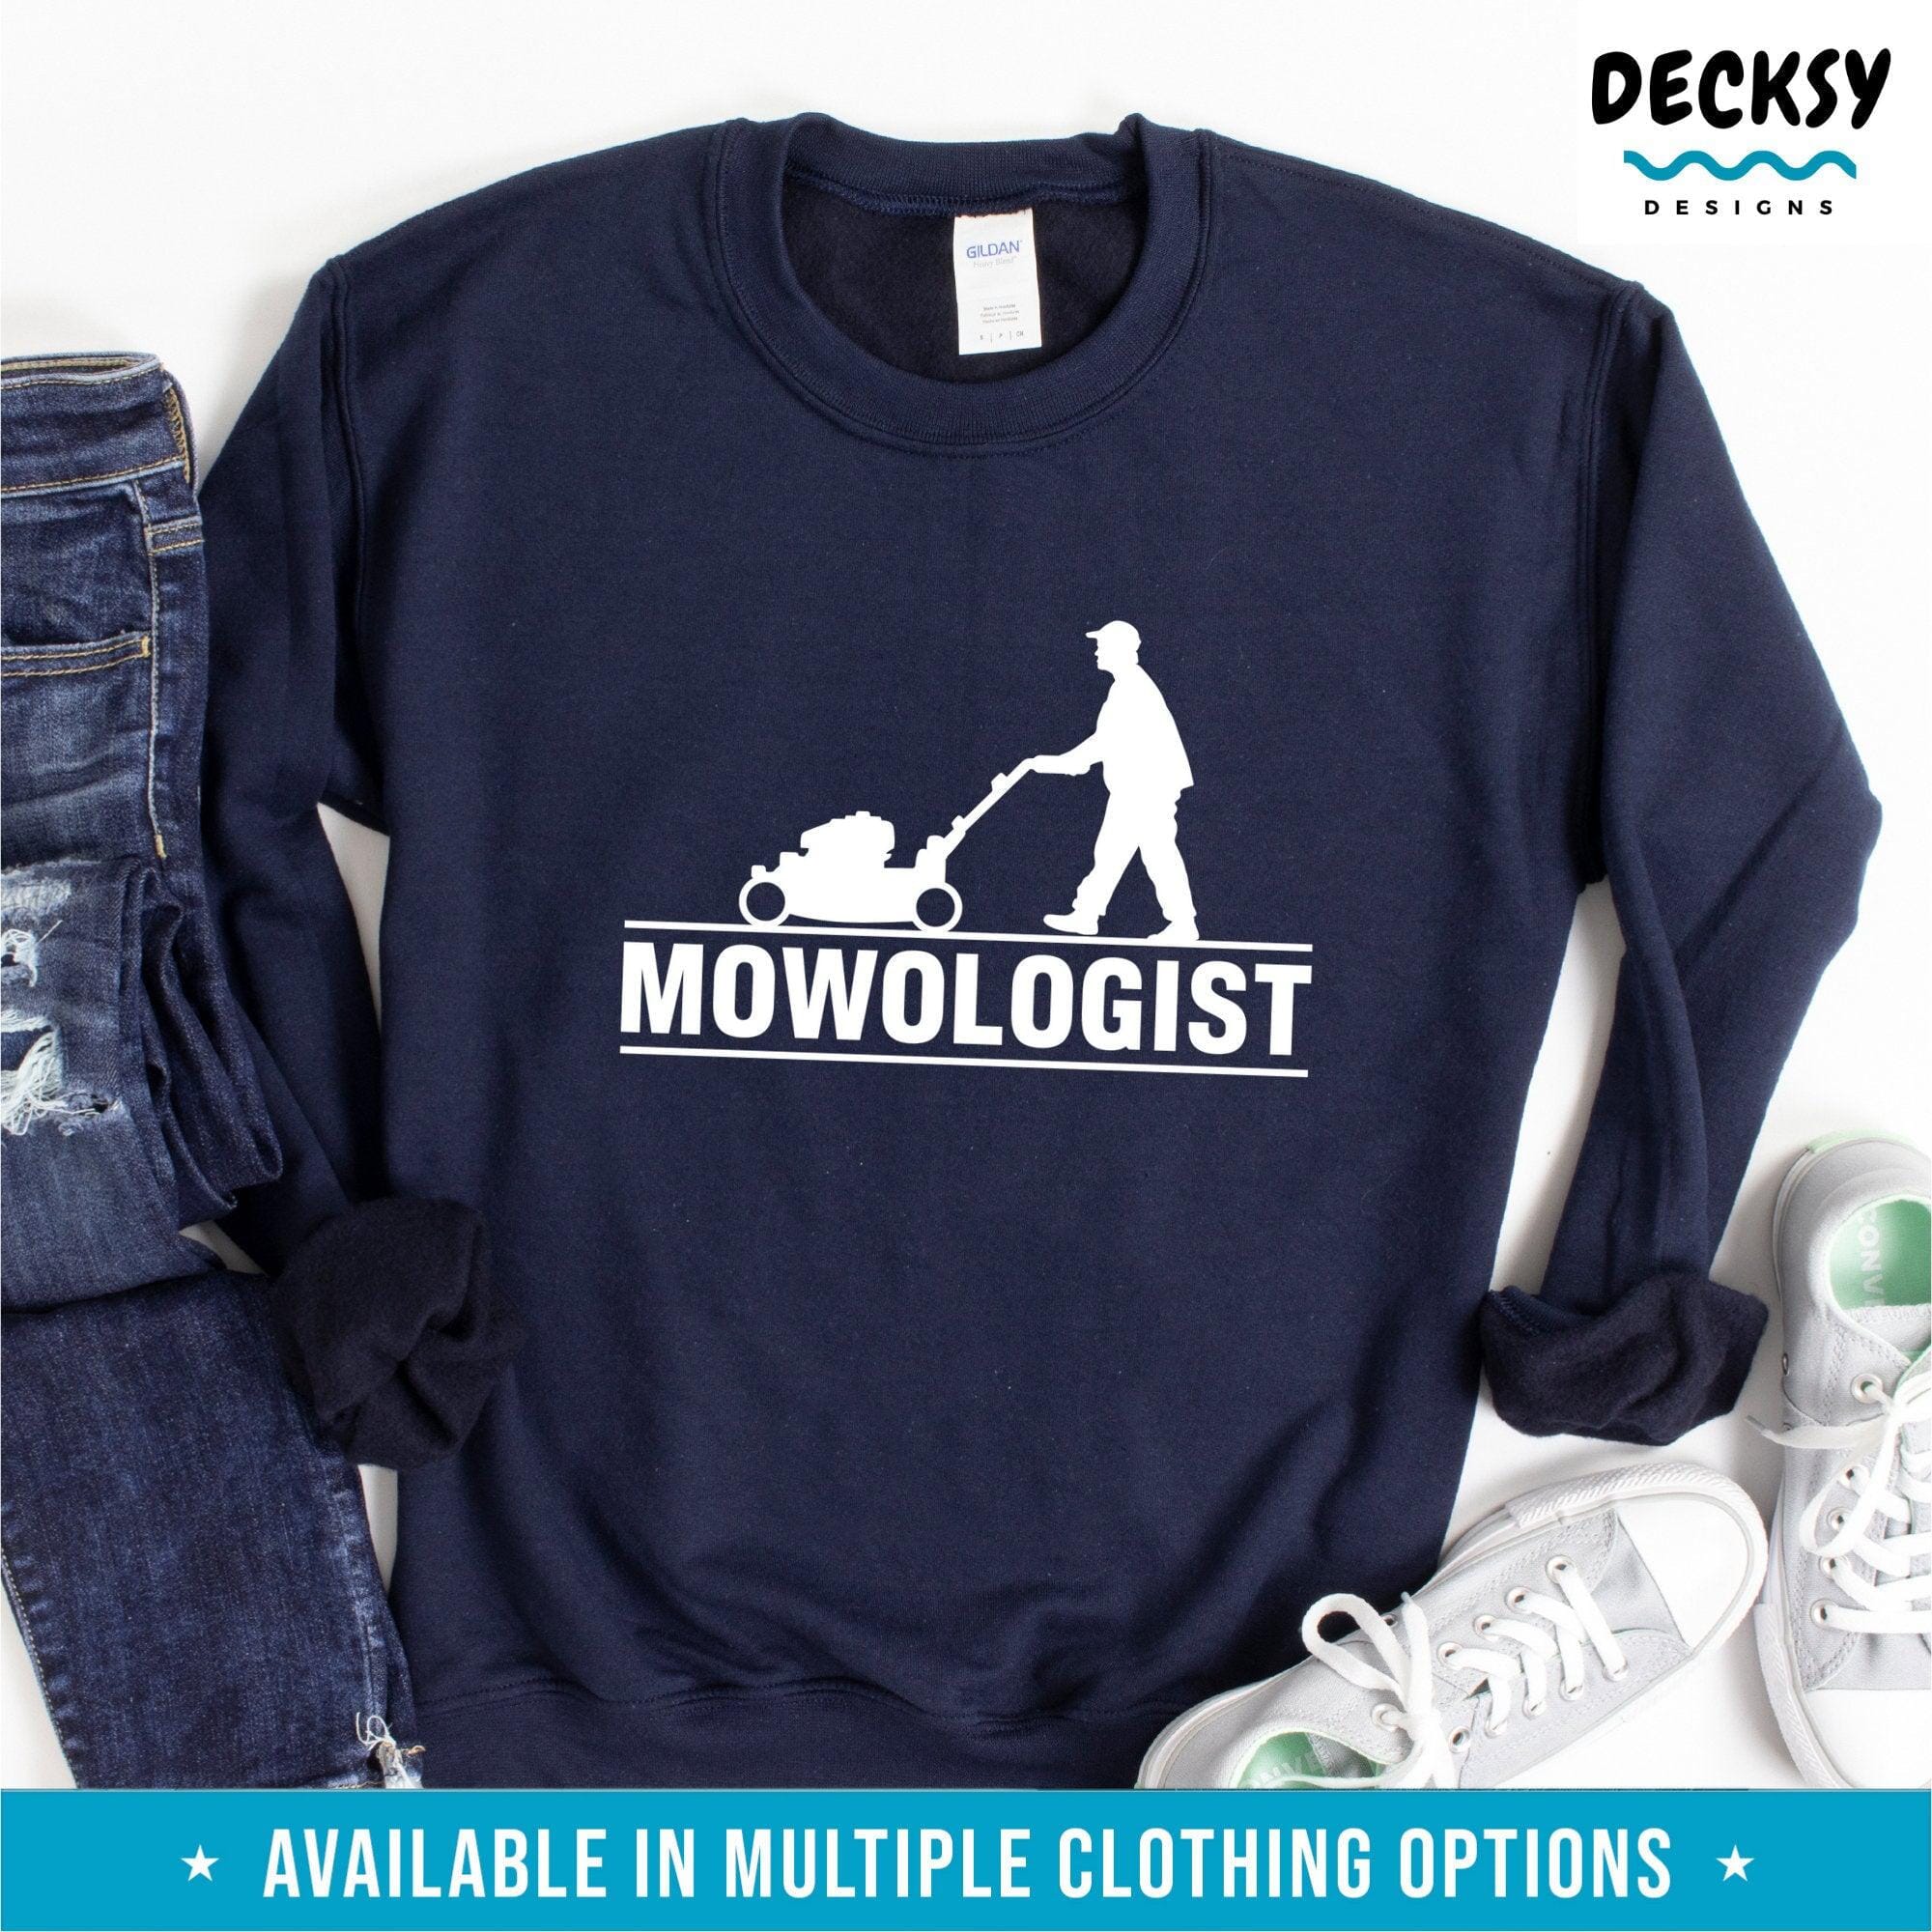 Mowing T-Shirt, Lawn Mower Gift-Clothing:Gender-Neutral Adult Clothing:Tops & Tees:T-shirts:Graphic Tees-DecksyDesigns